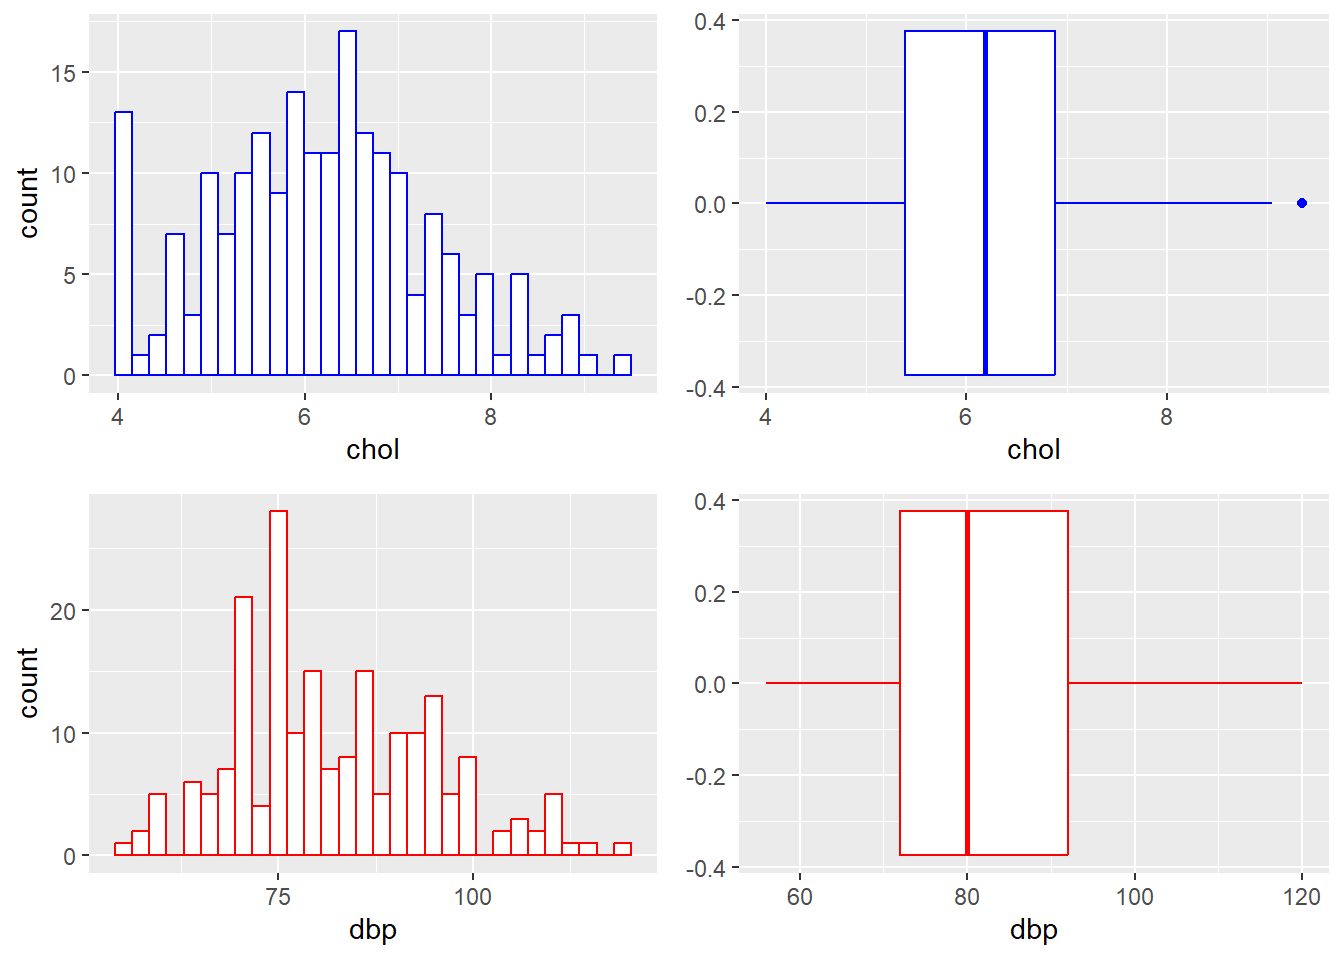 Histograms and box-and-whiskers plots for `chol` and `dbp`.